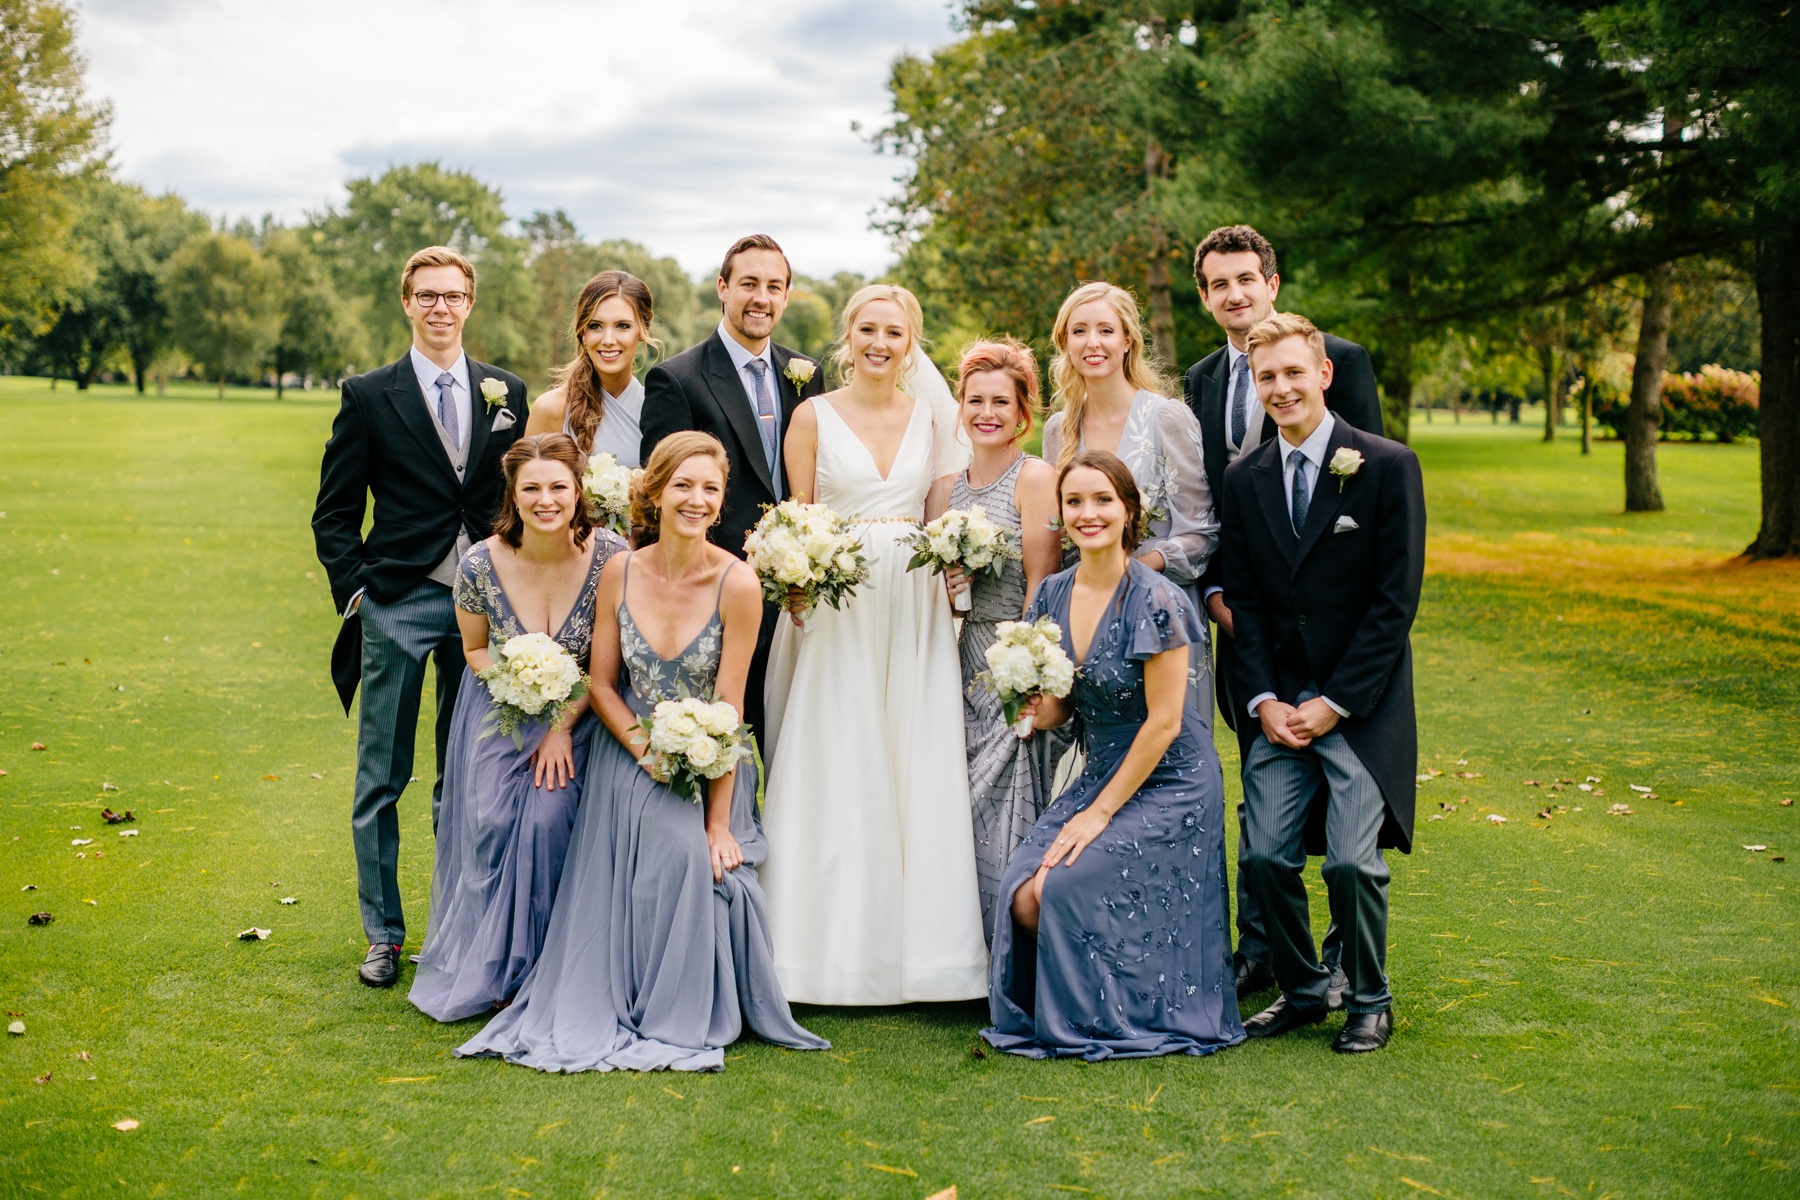 Bridal Party Portraits at the Saginaw Country Club